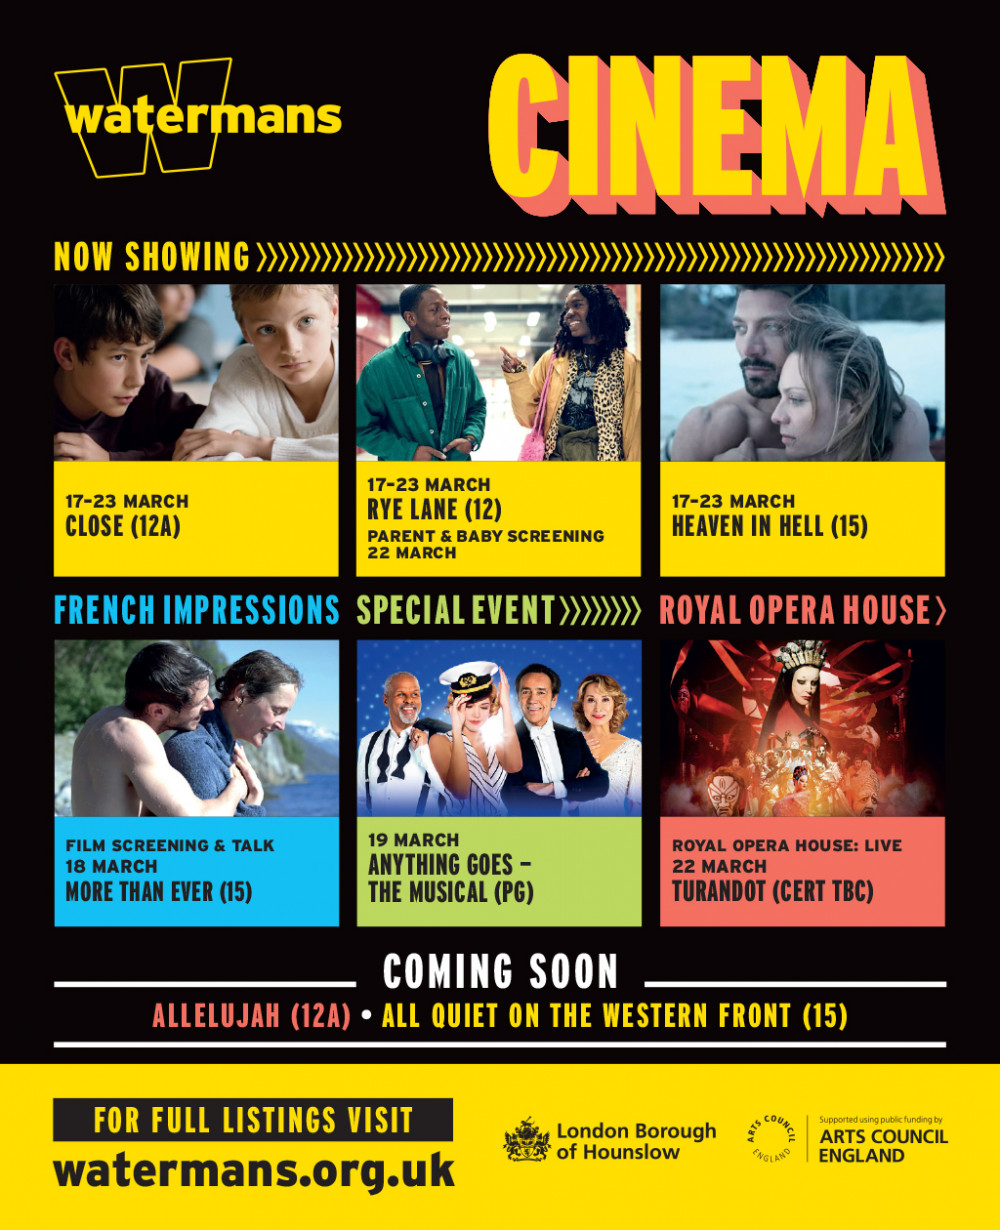 Check out all of the exciting film, performance, and art options on at Watermans. Photo: Watermans.